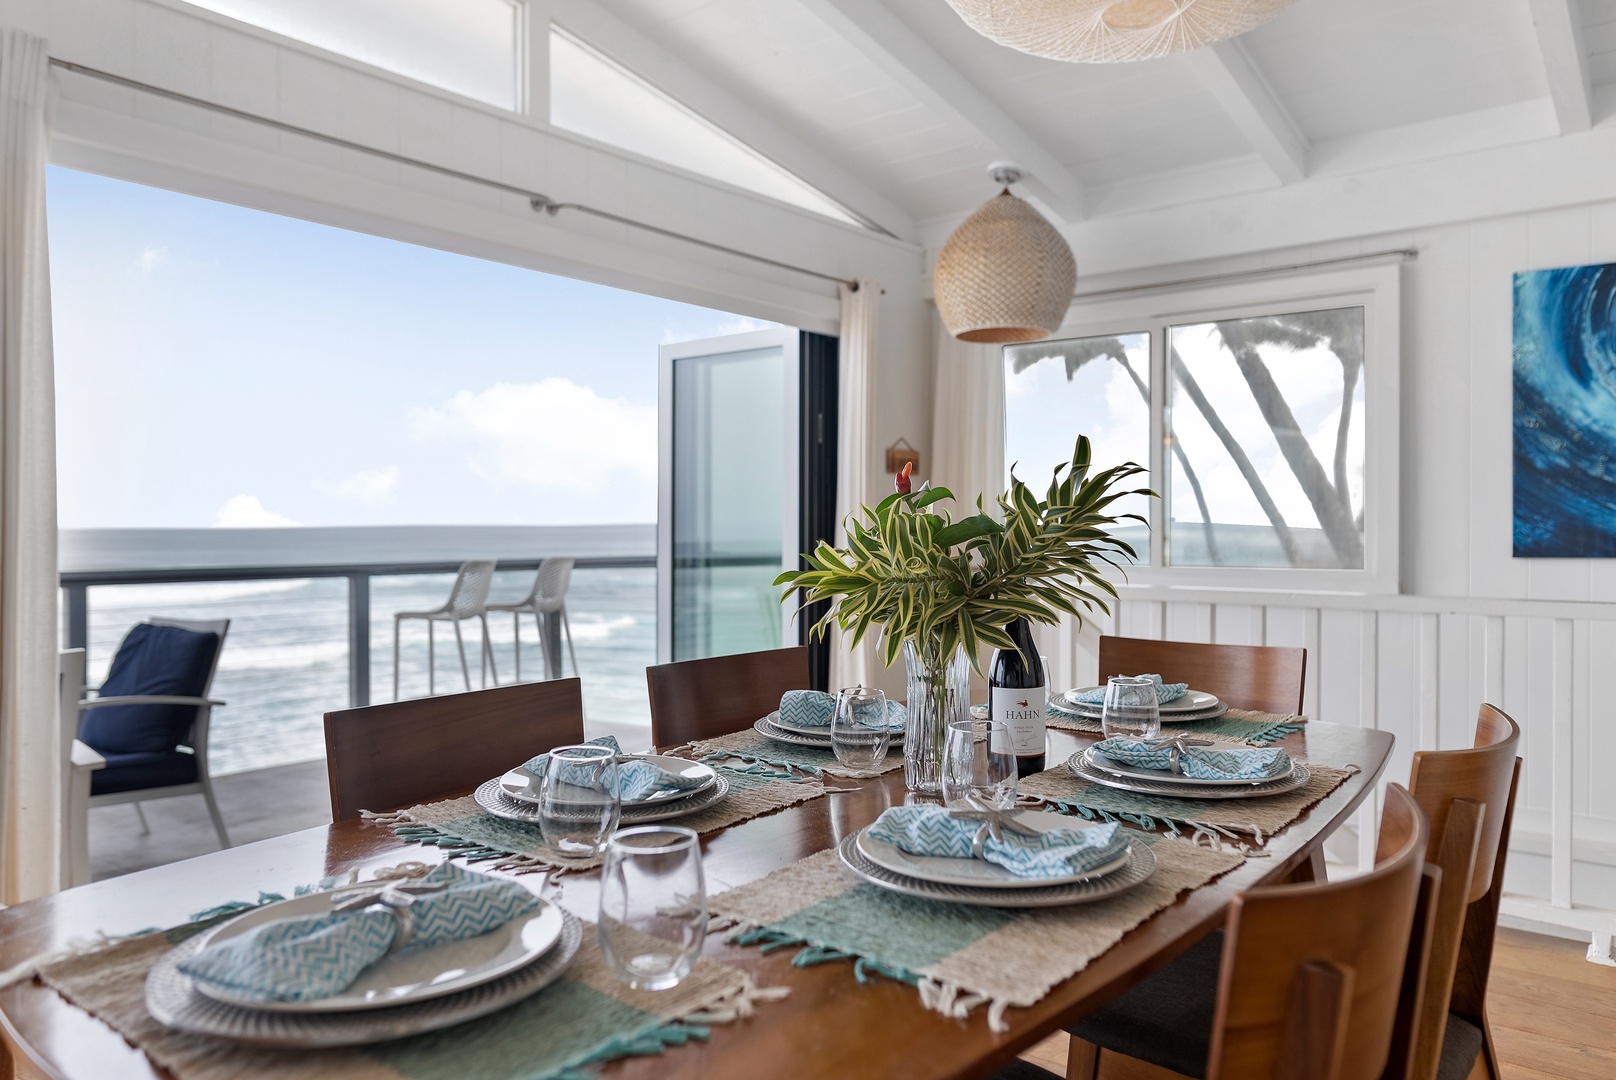 Haleiwa Vacation Rentals, Surfer's Paradise - Enjoy your favorite meals with your loved ones with a stunning view